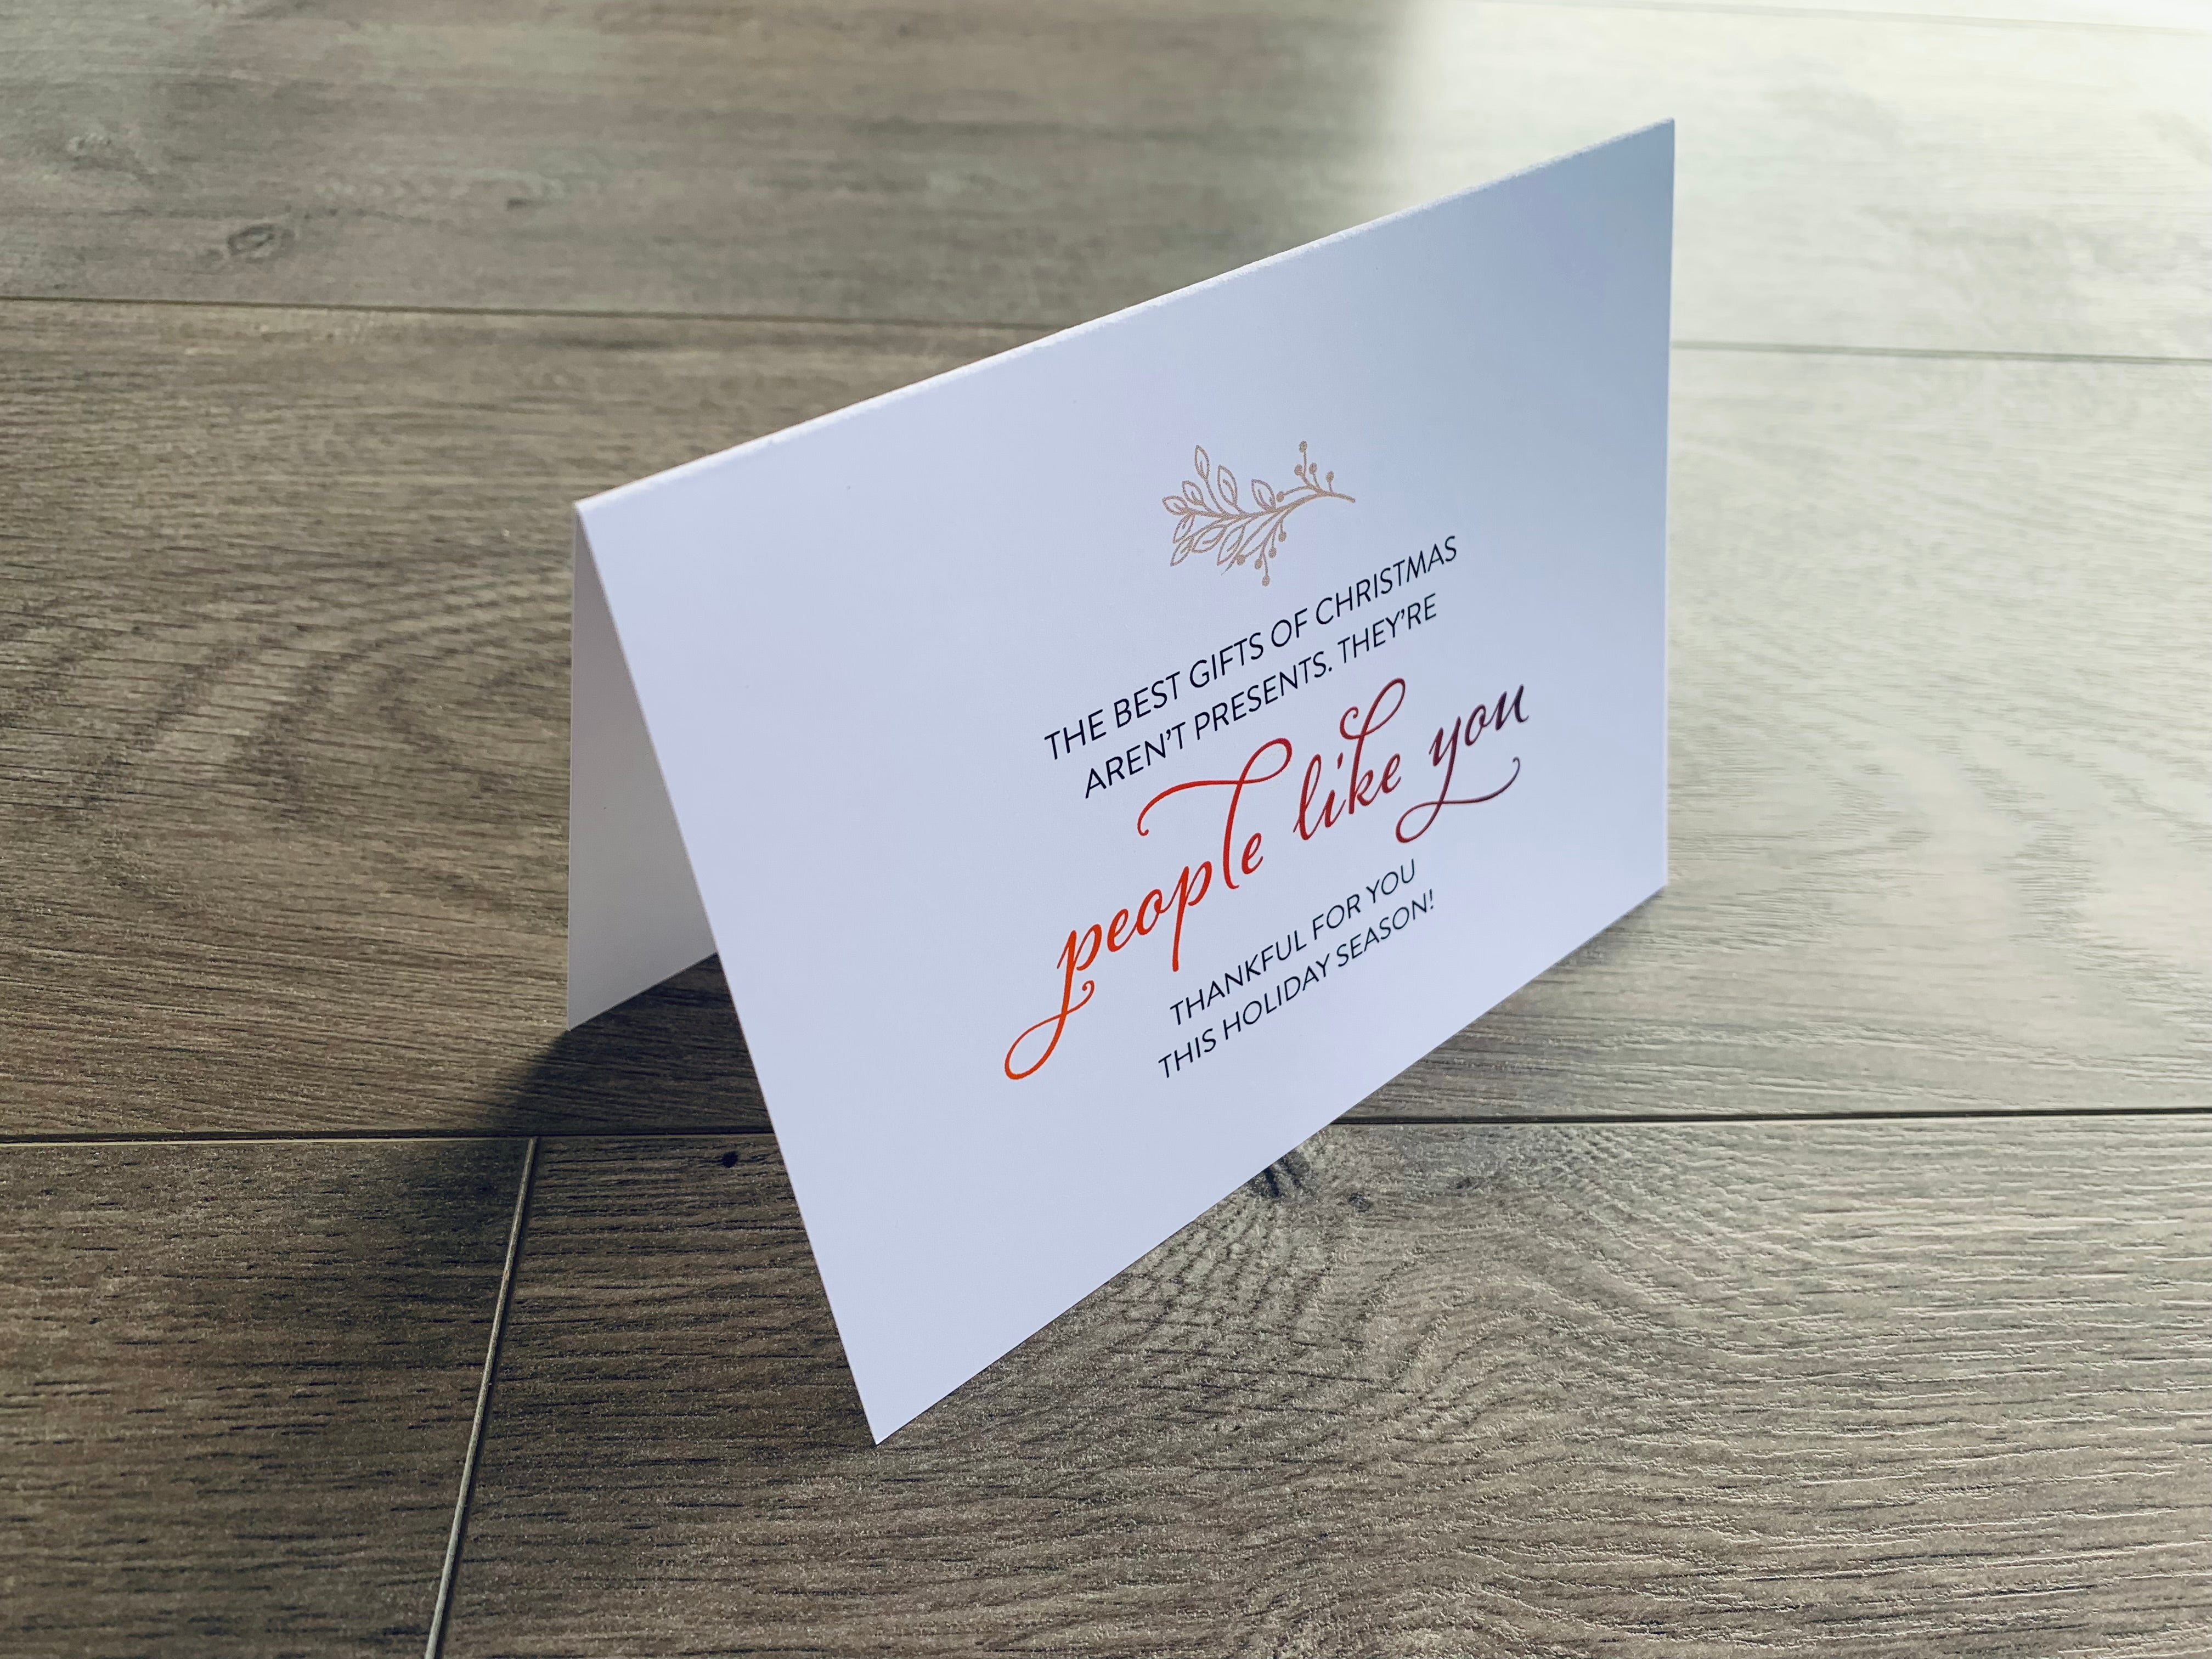 A white folded notecard sits on a wooden floor. On the front of the card, it reads, "The best gifts of Christmas aren't presents. They're people like you. Thankful for you this holiday season!" Merry Thanks Collection by Stationare.